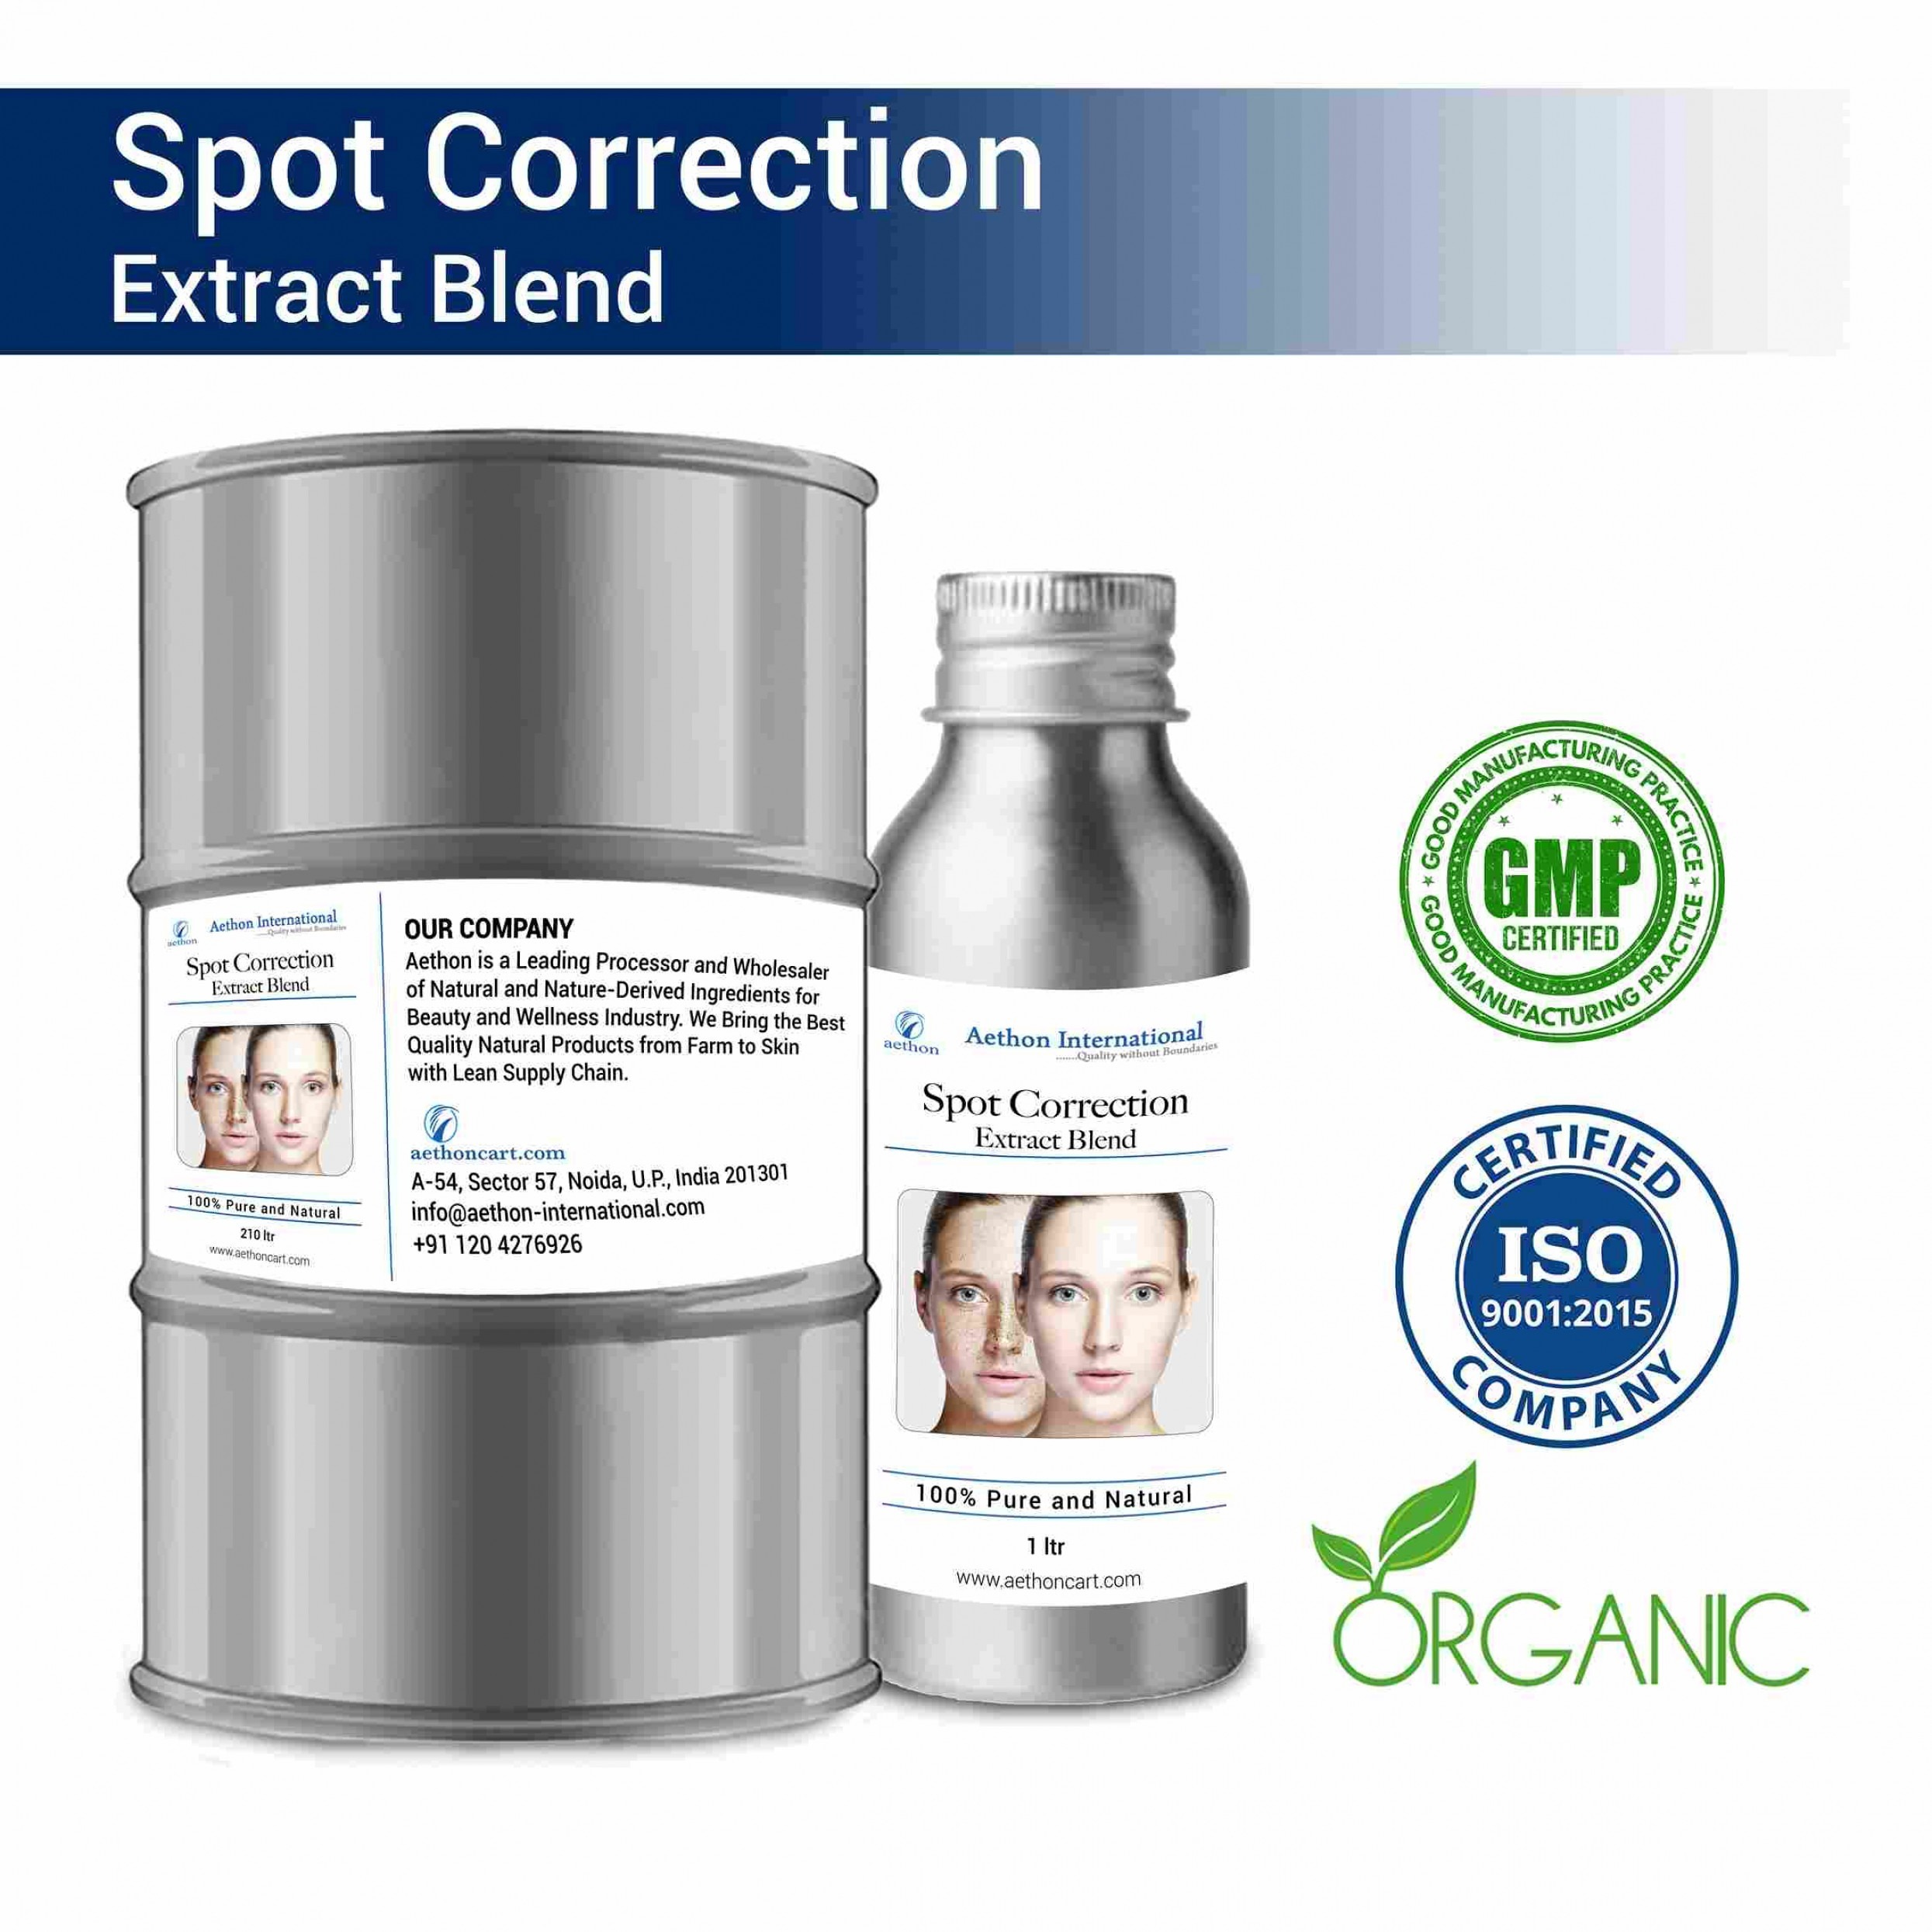 Spot Correction Extract Blend (Oil)